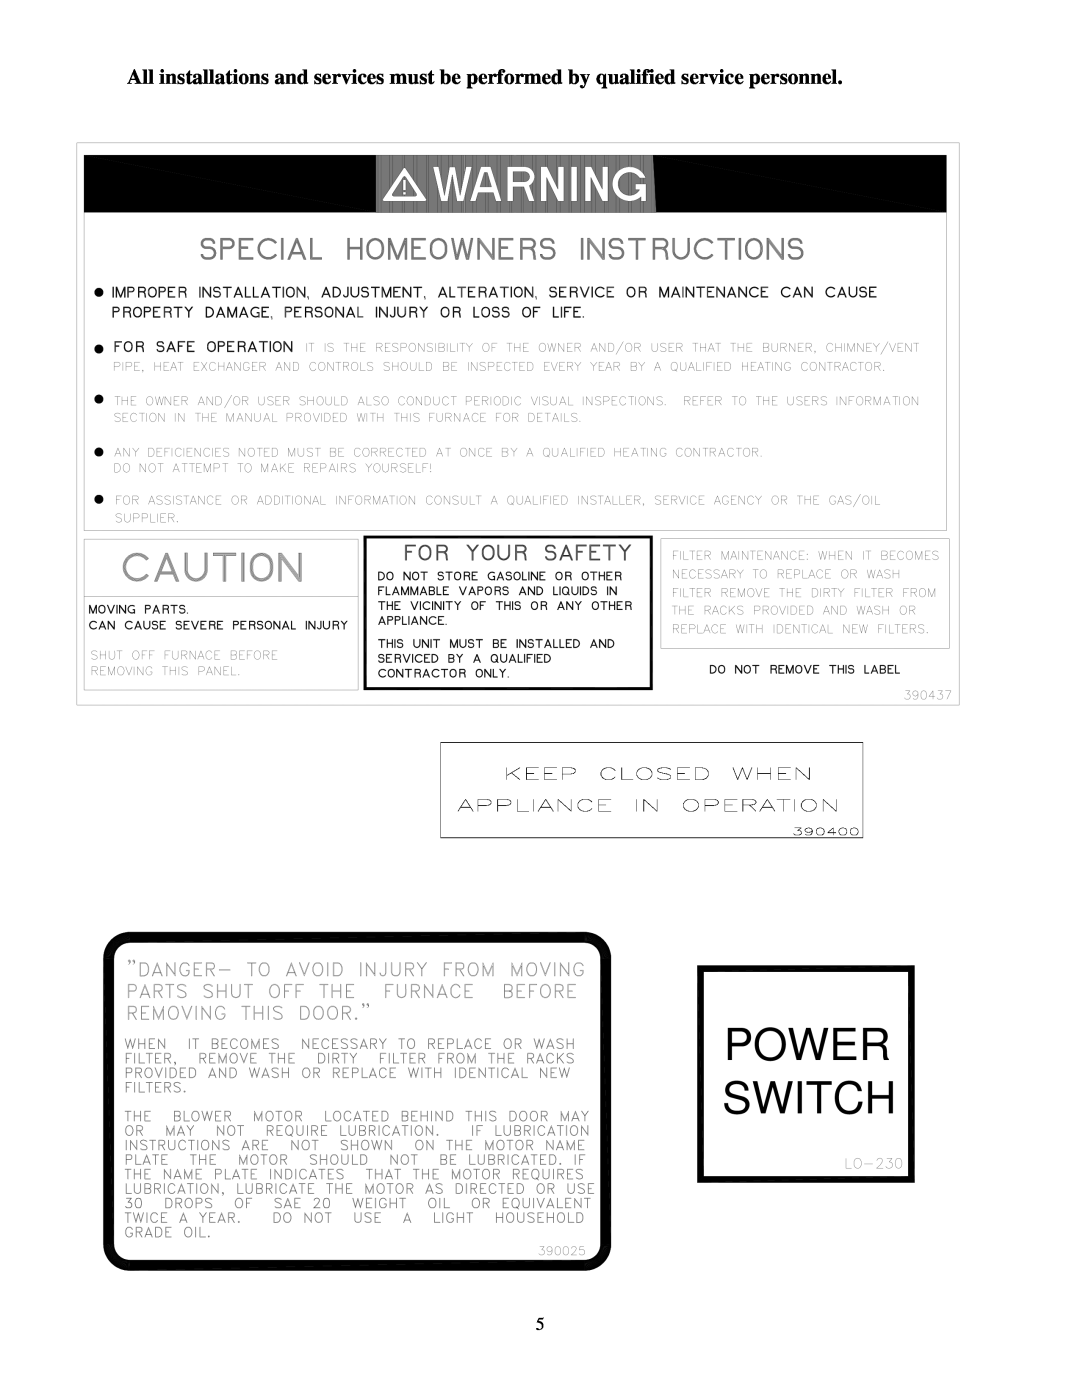 Thermo Products omd-70 service manual Power Switch 